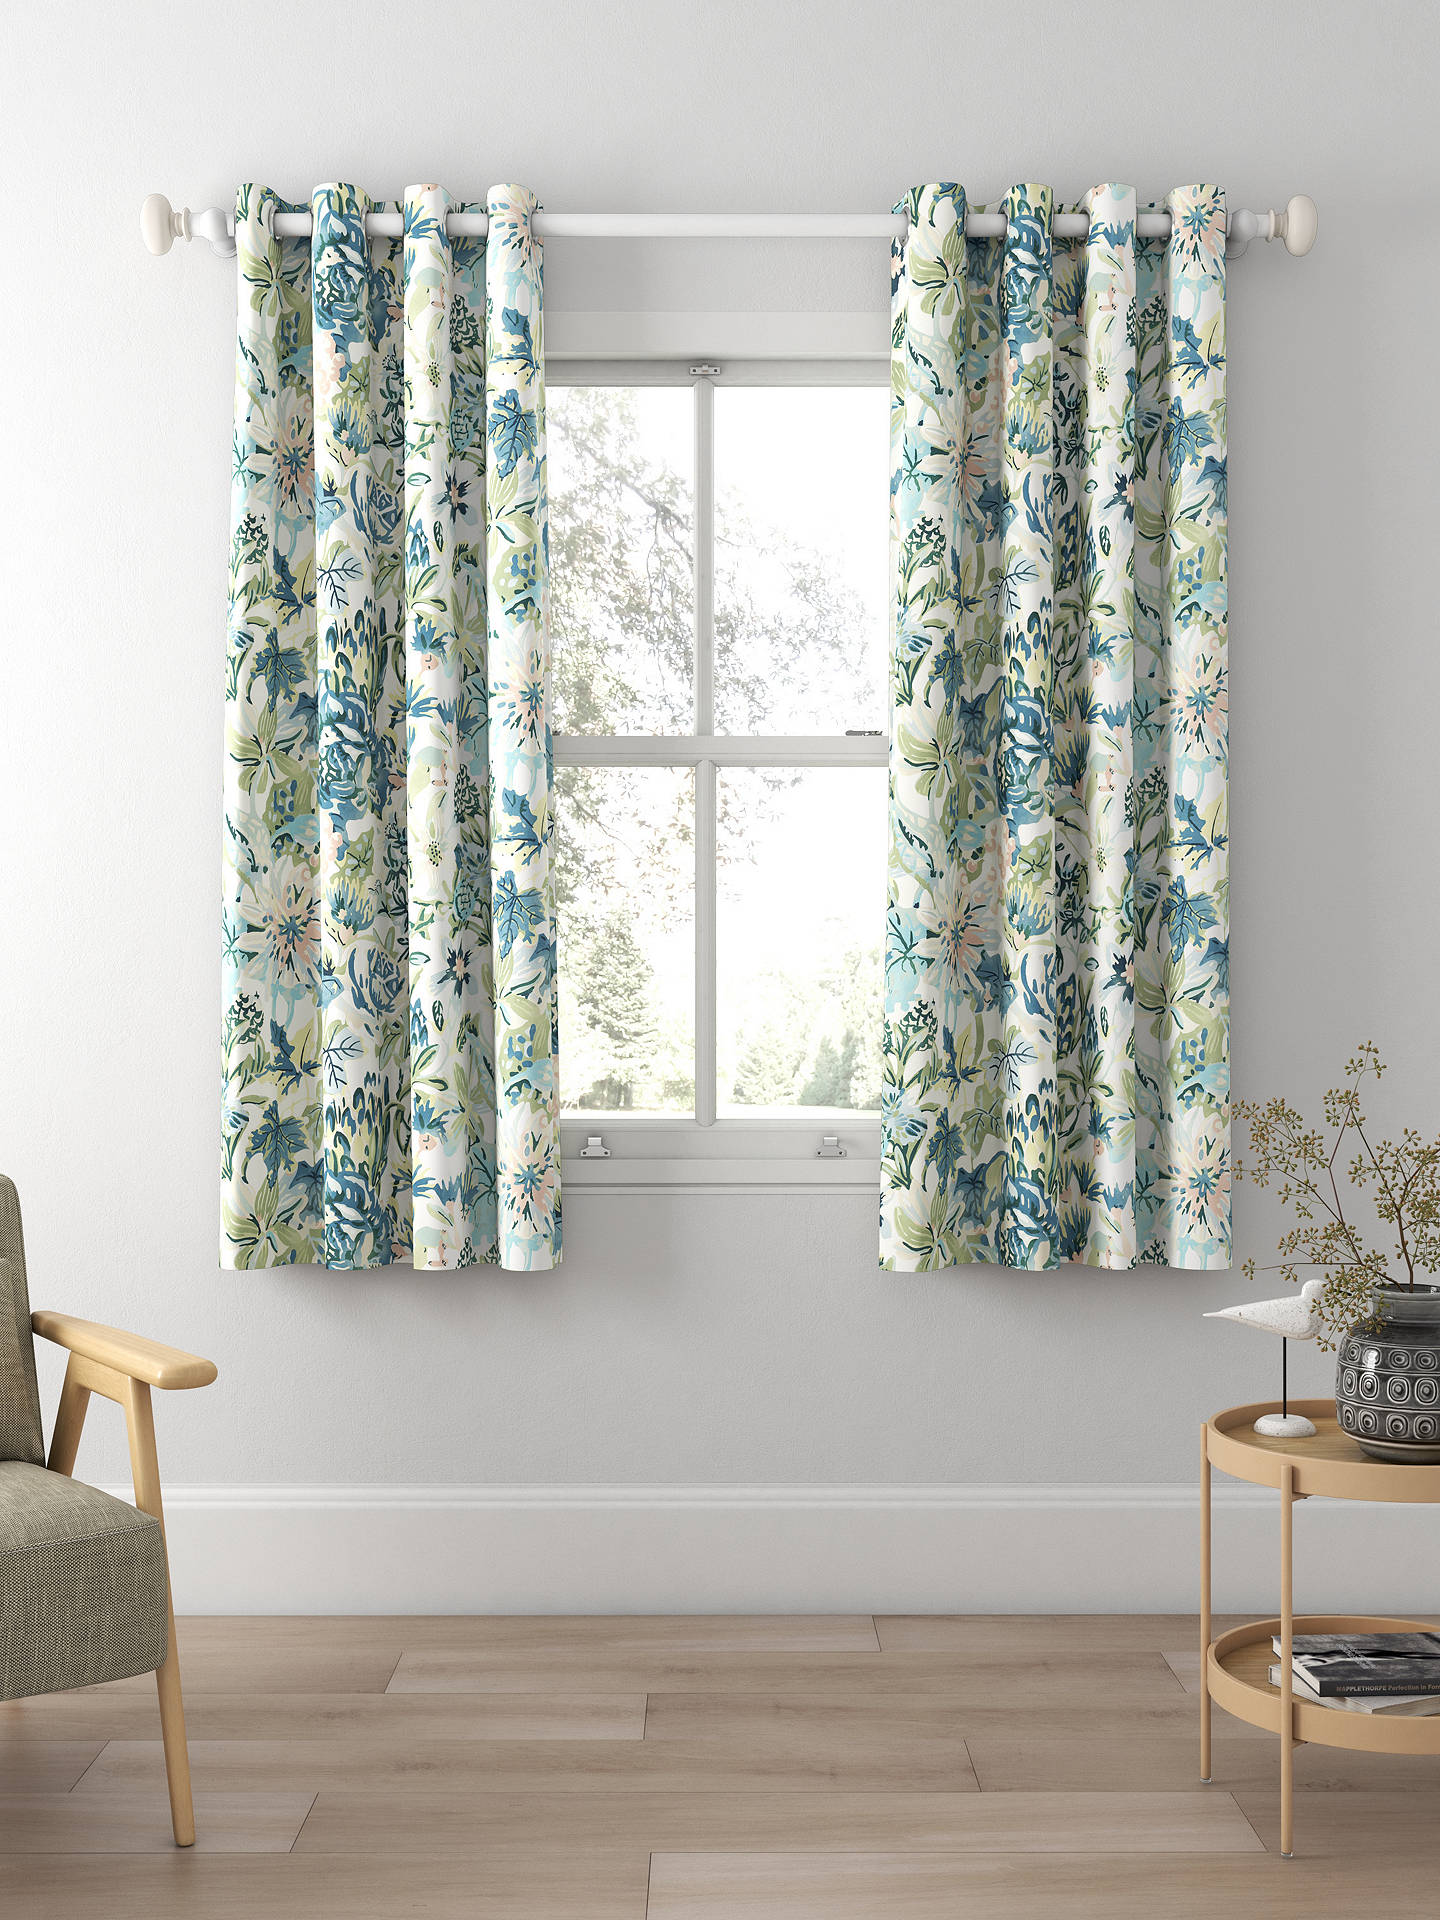 Harlequin Perennials Made to Measure Curtains, Seaglass/Exhale